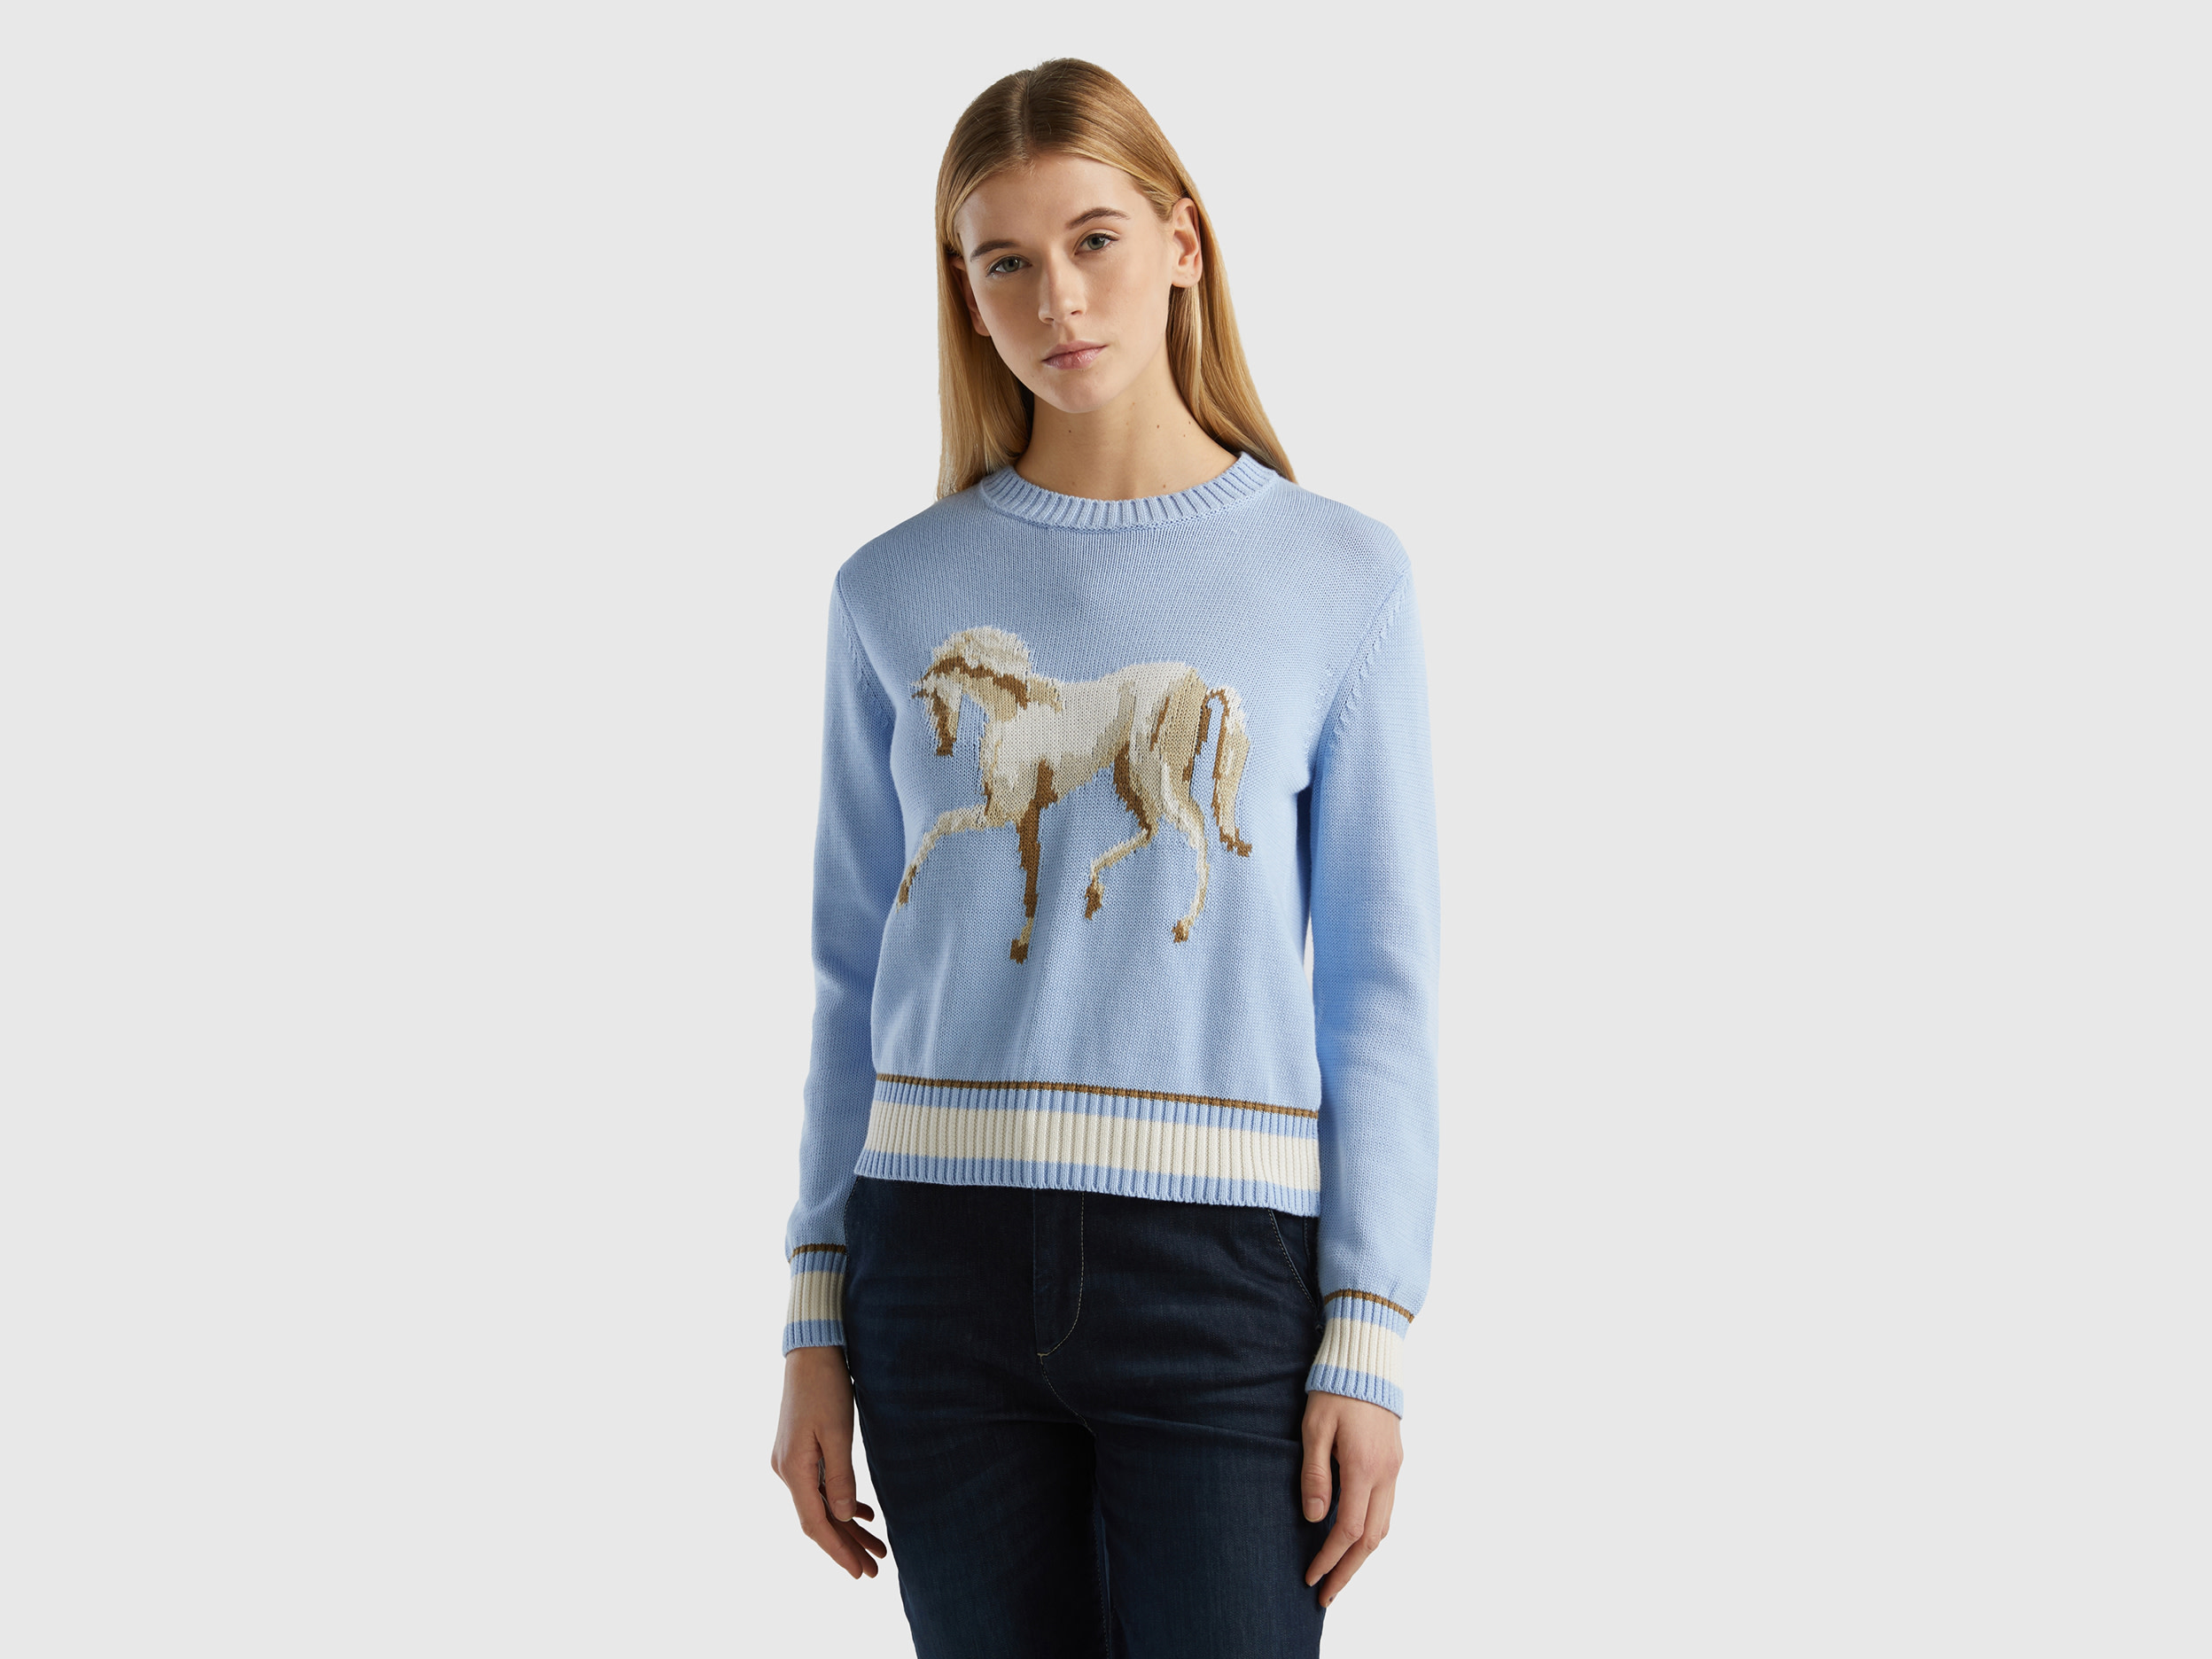 Benetton, Sweater With Horse Inlay, size M, Sky Blue, Women